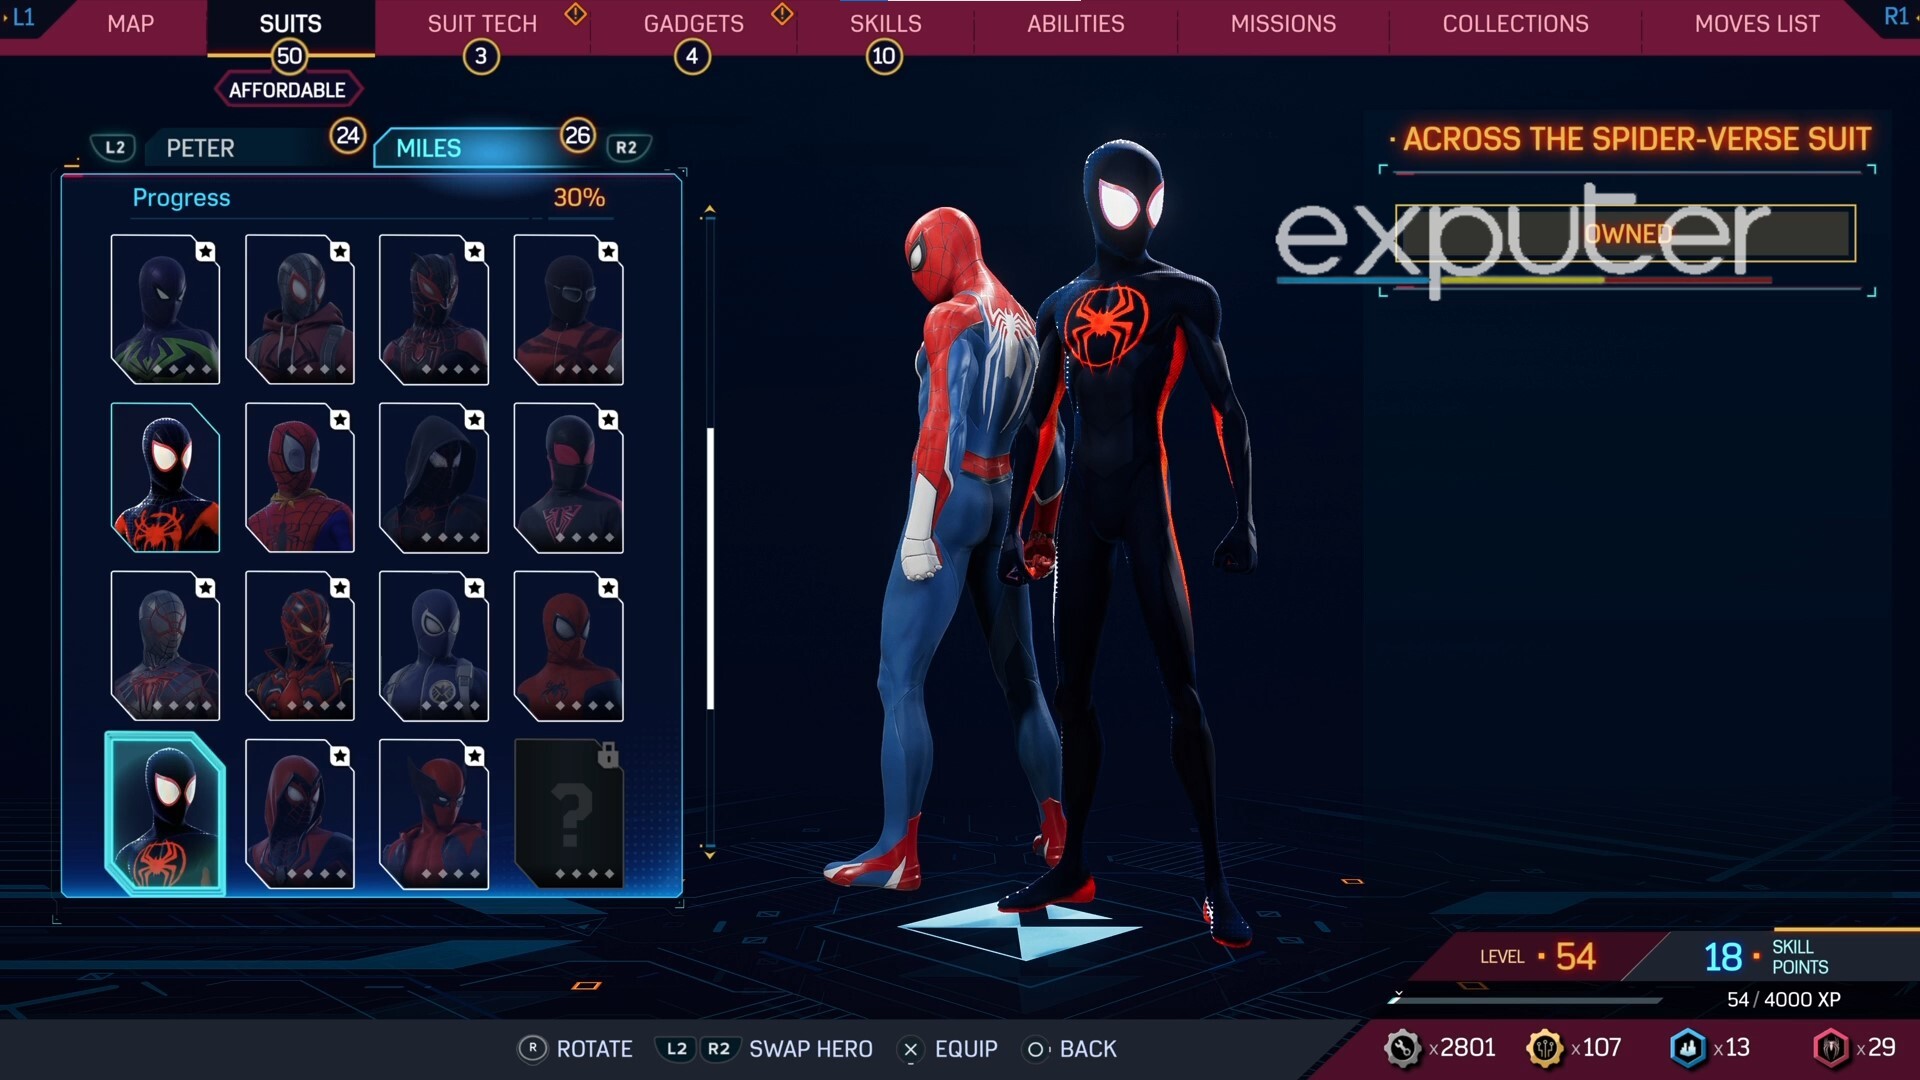 Across The Spider Verse Suit 